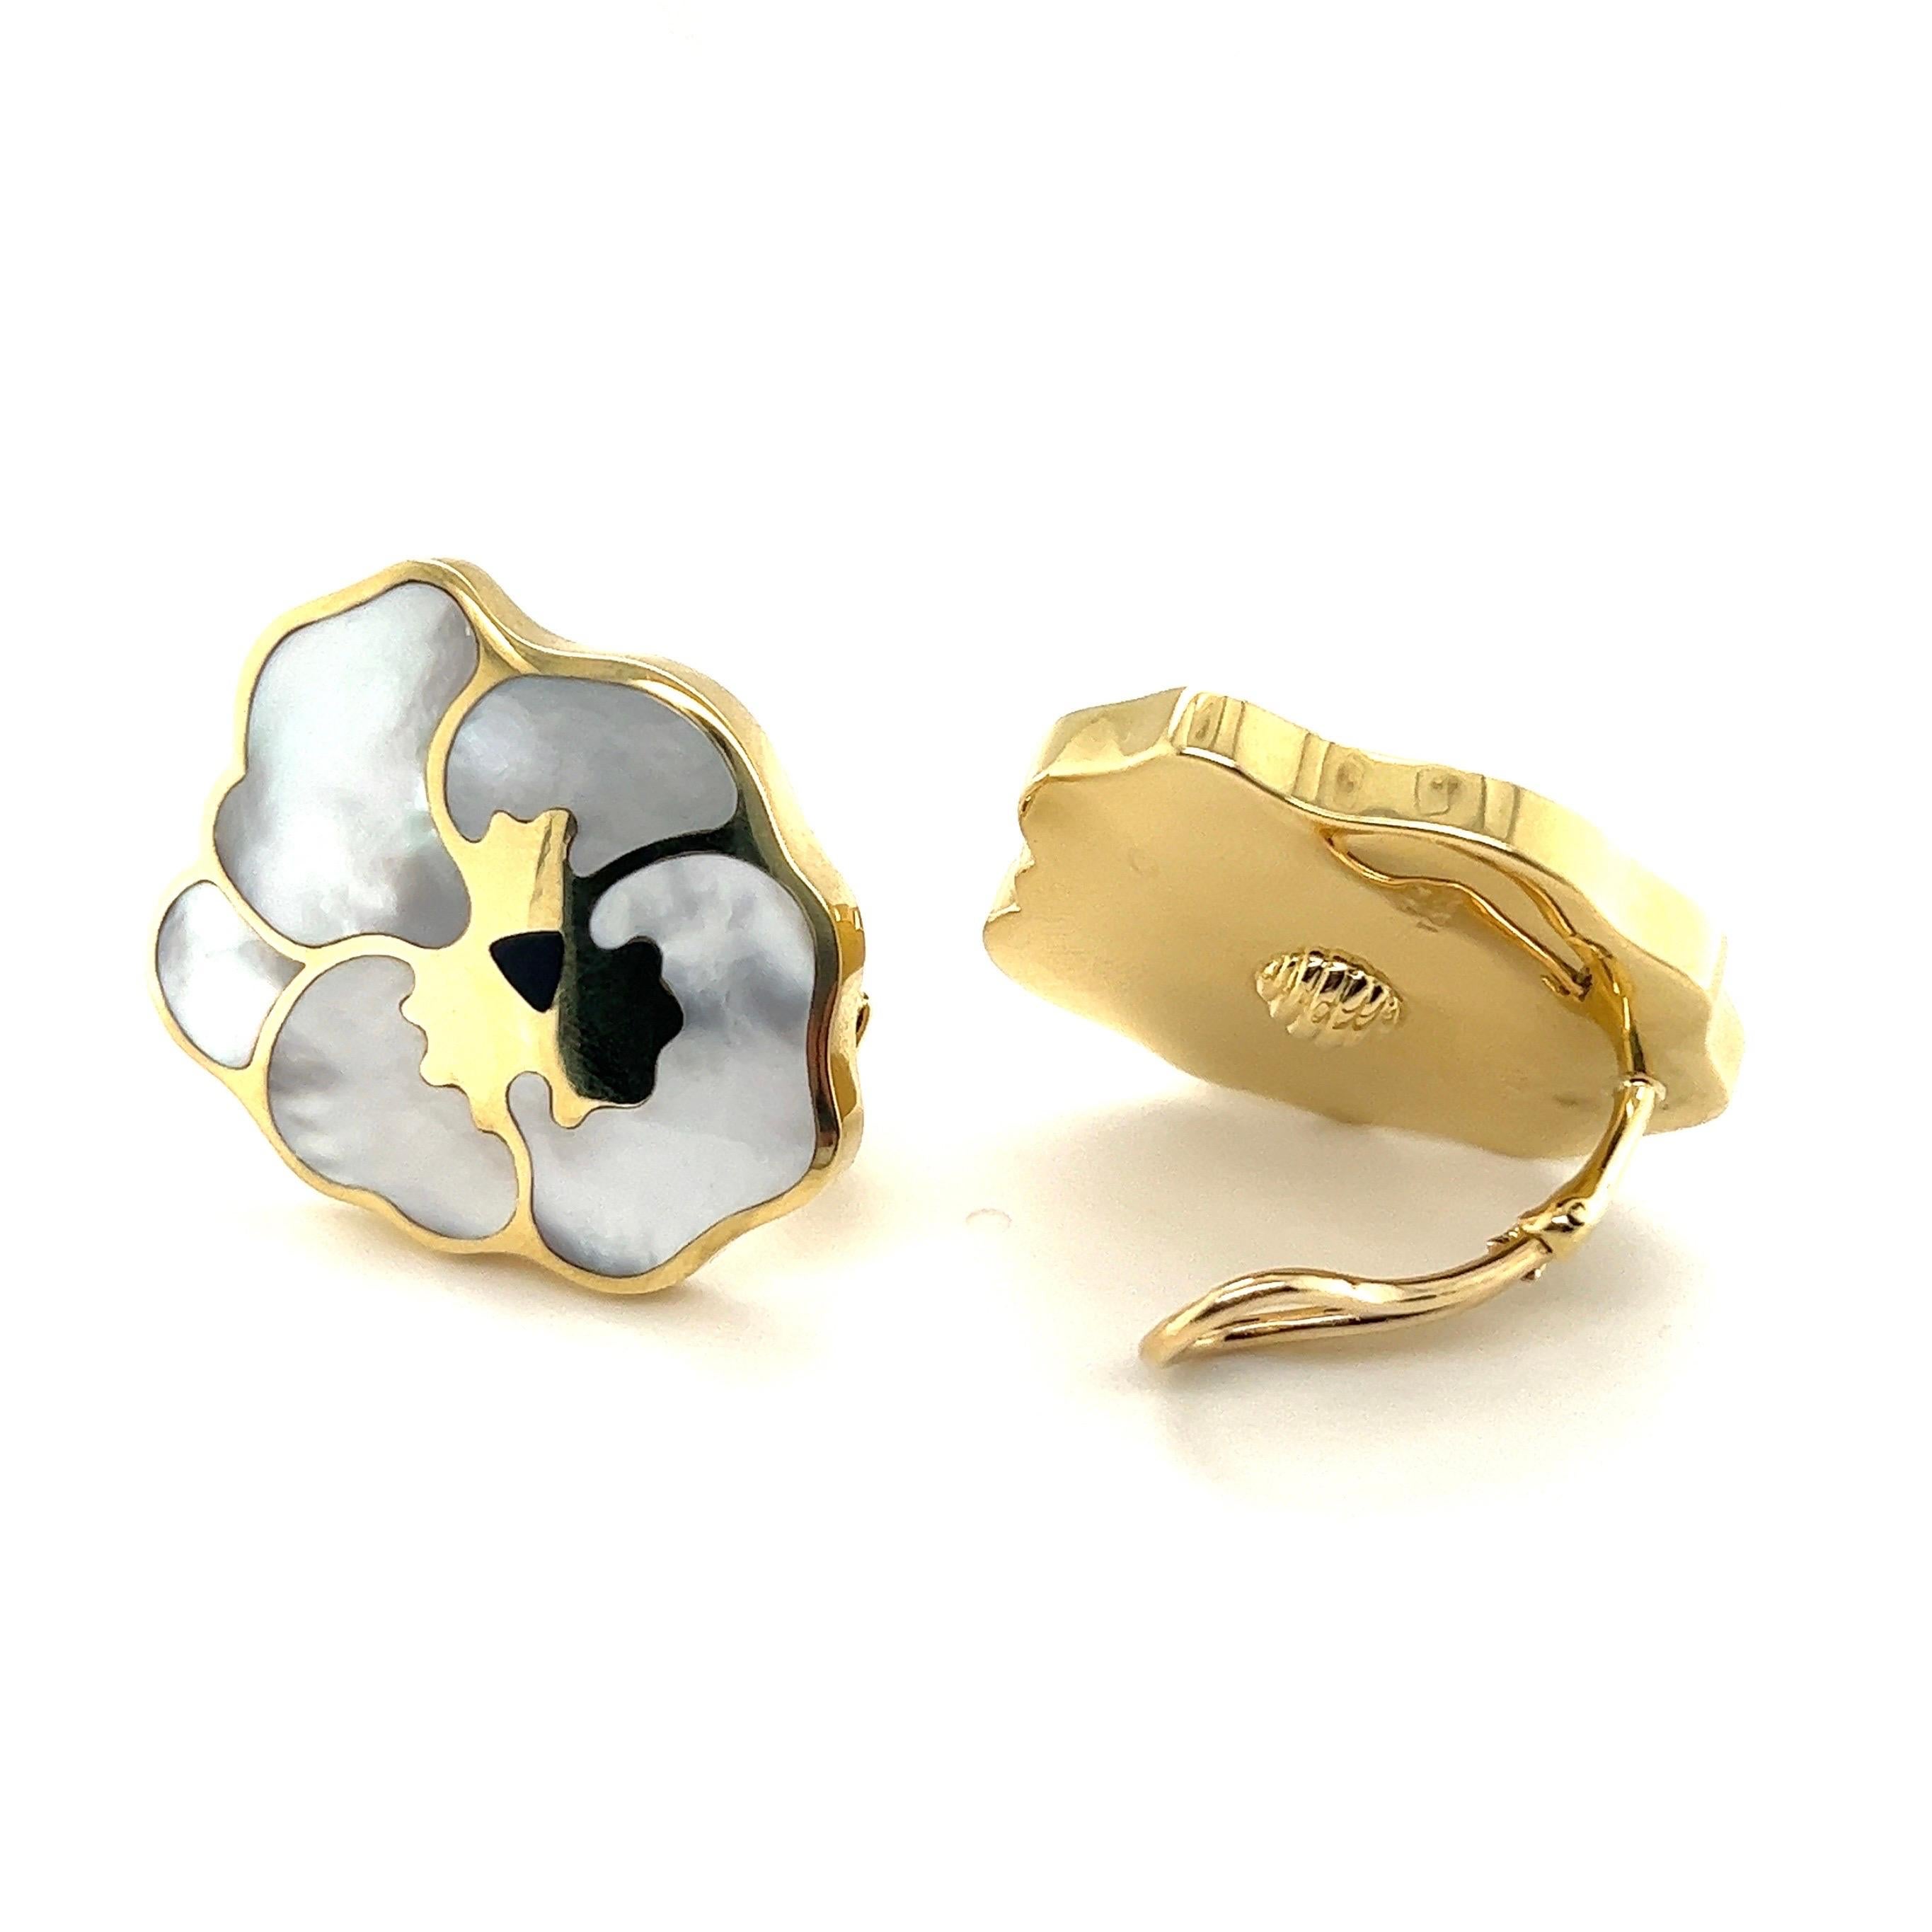 Adorable pair of large 18 karat yellow gold, mother of pearl and onyx 